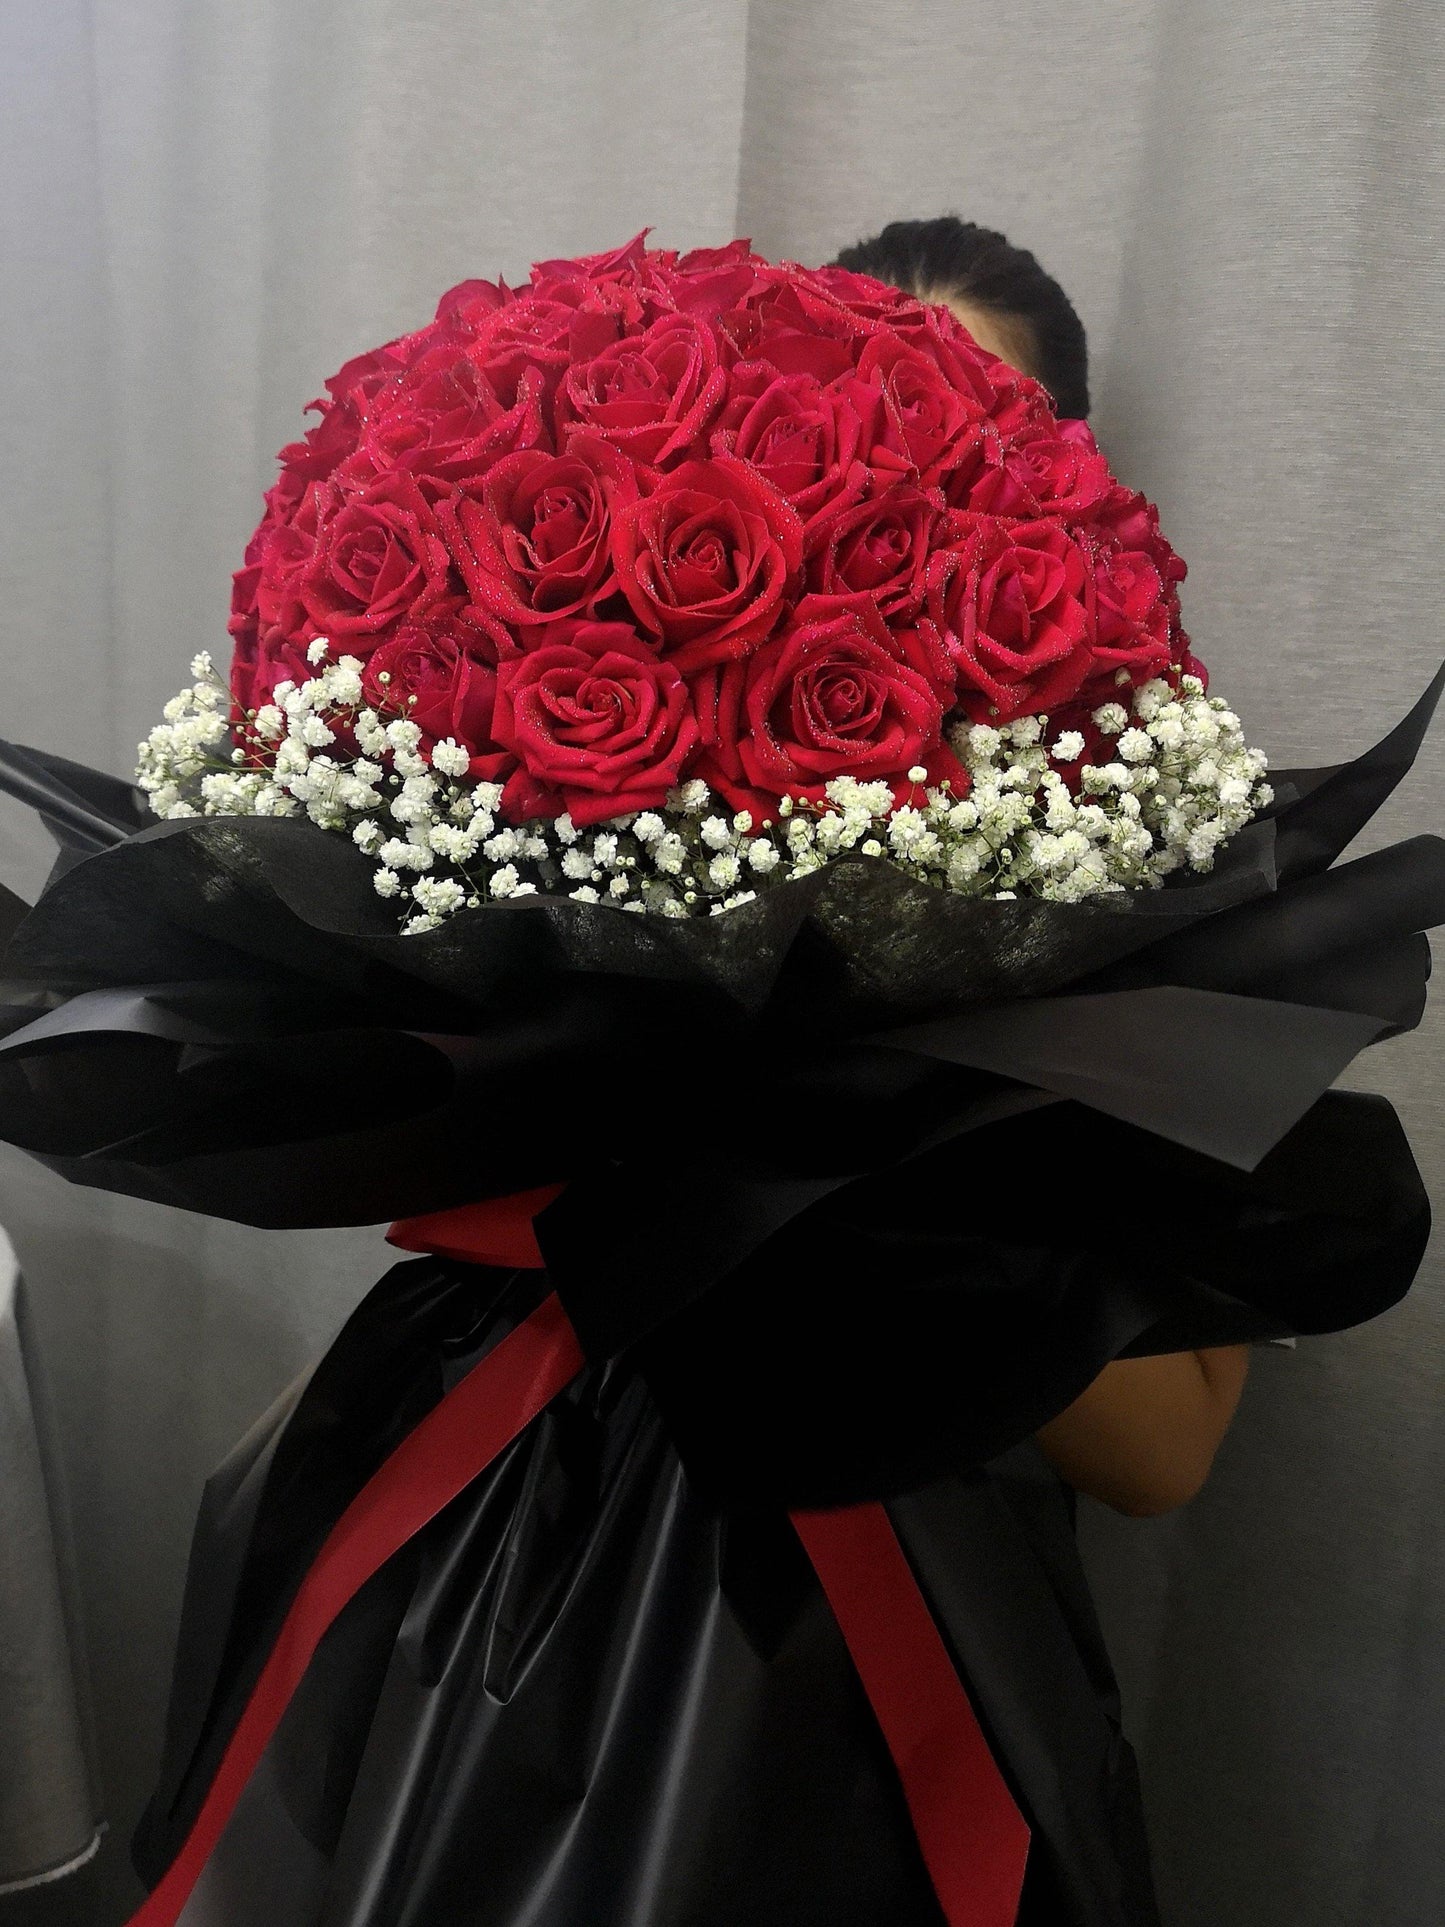 Beloved Love- 99 Roses Bouquet | Fresh Flower Bouquet Delivery